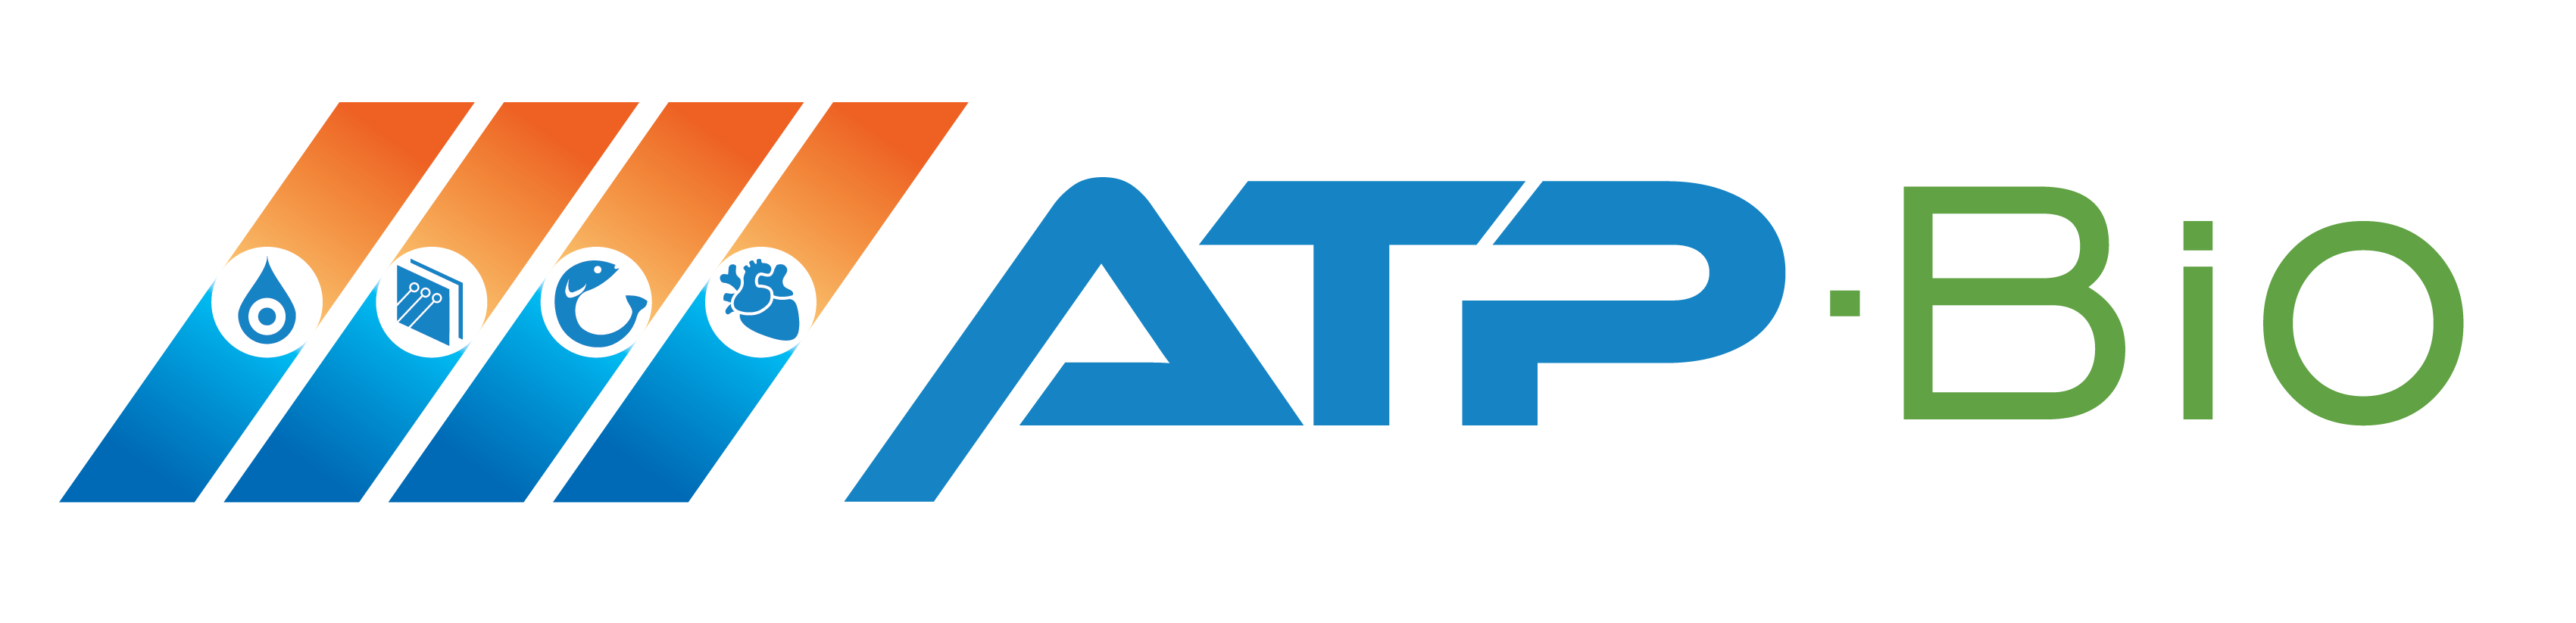 Company logo for ATP Bio: orange and blue slashes with blue icons intersecting colors; words ATP and Bio